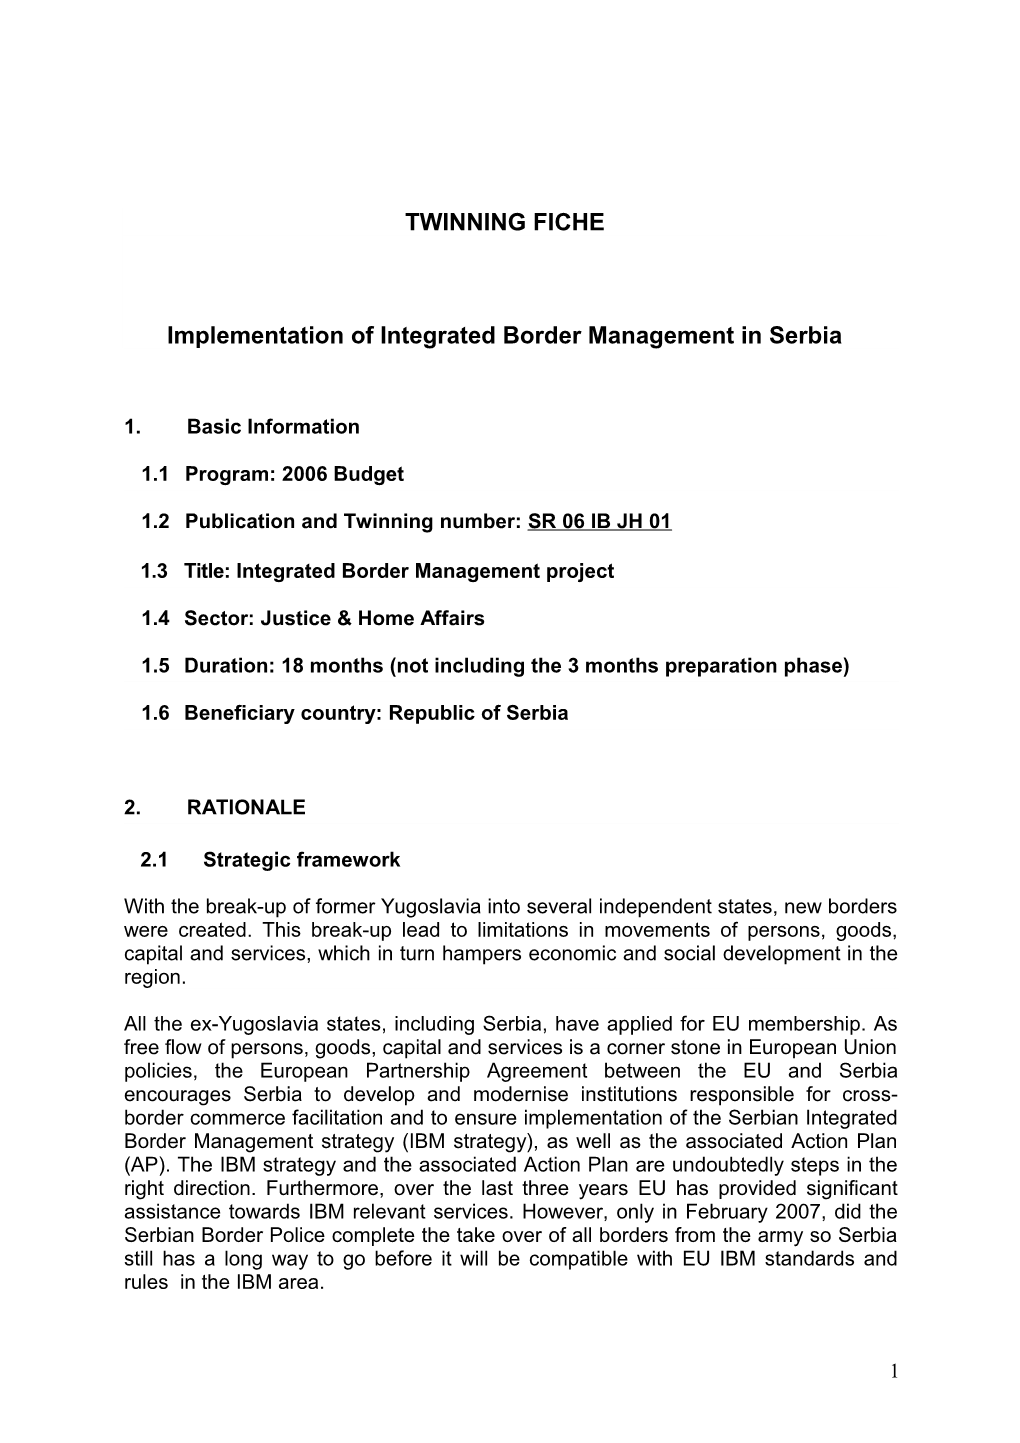 Implementation of Integrated Border Management in Serbia